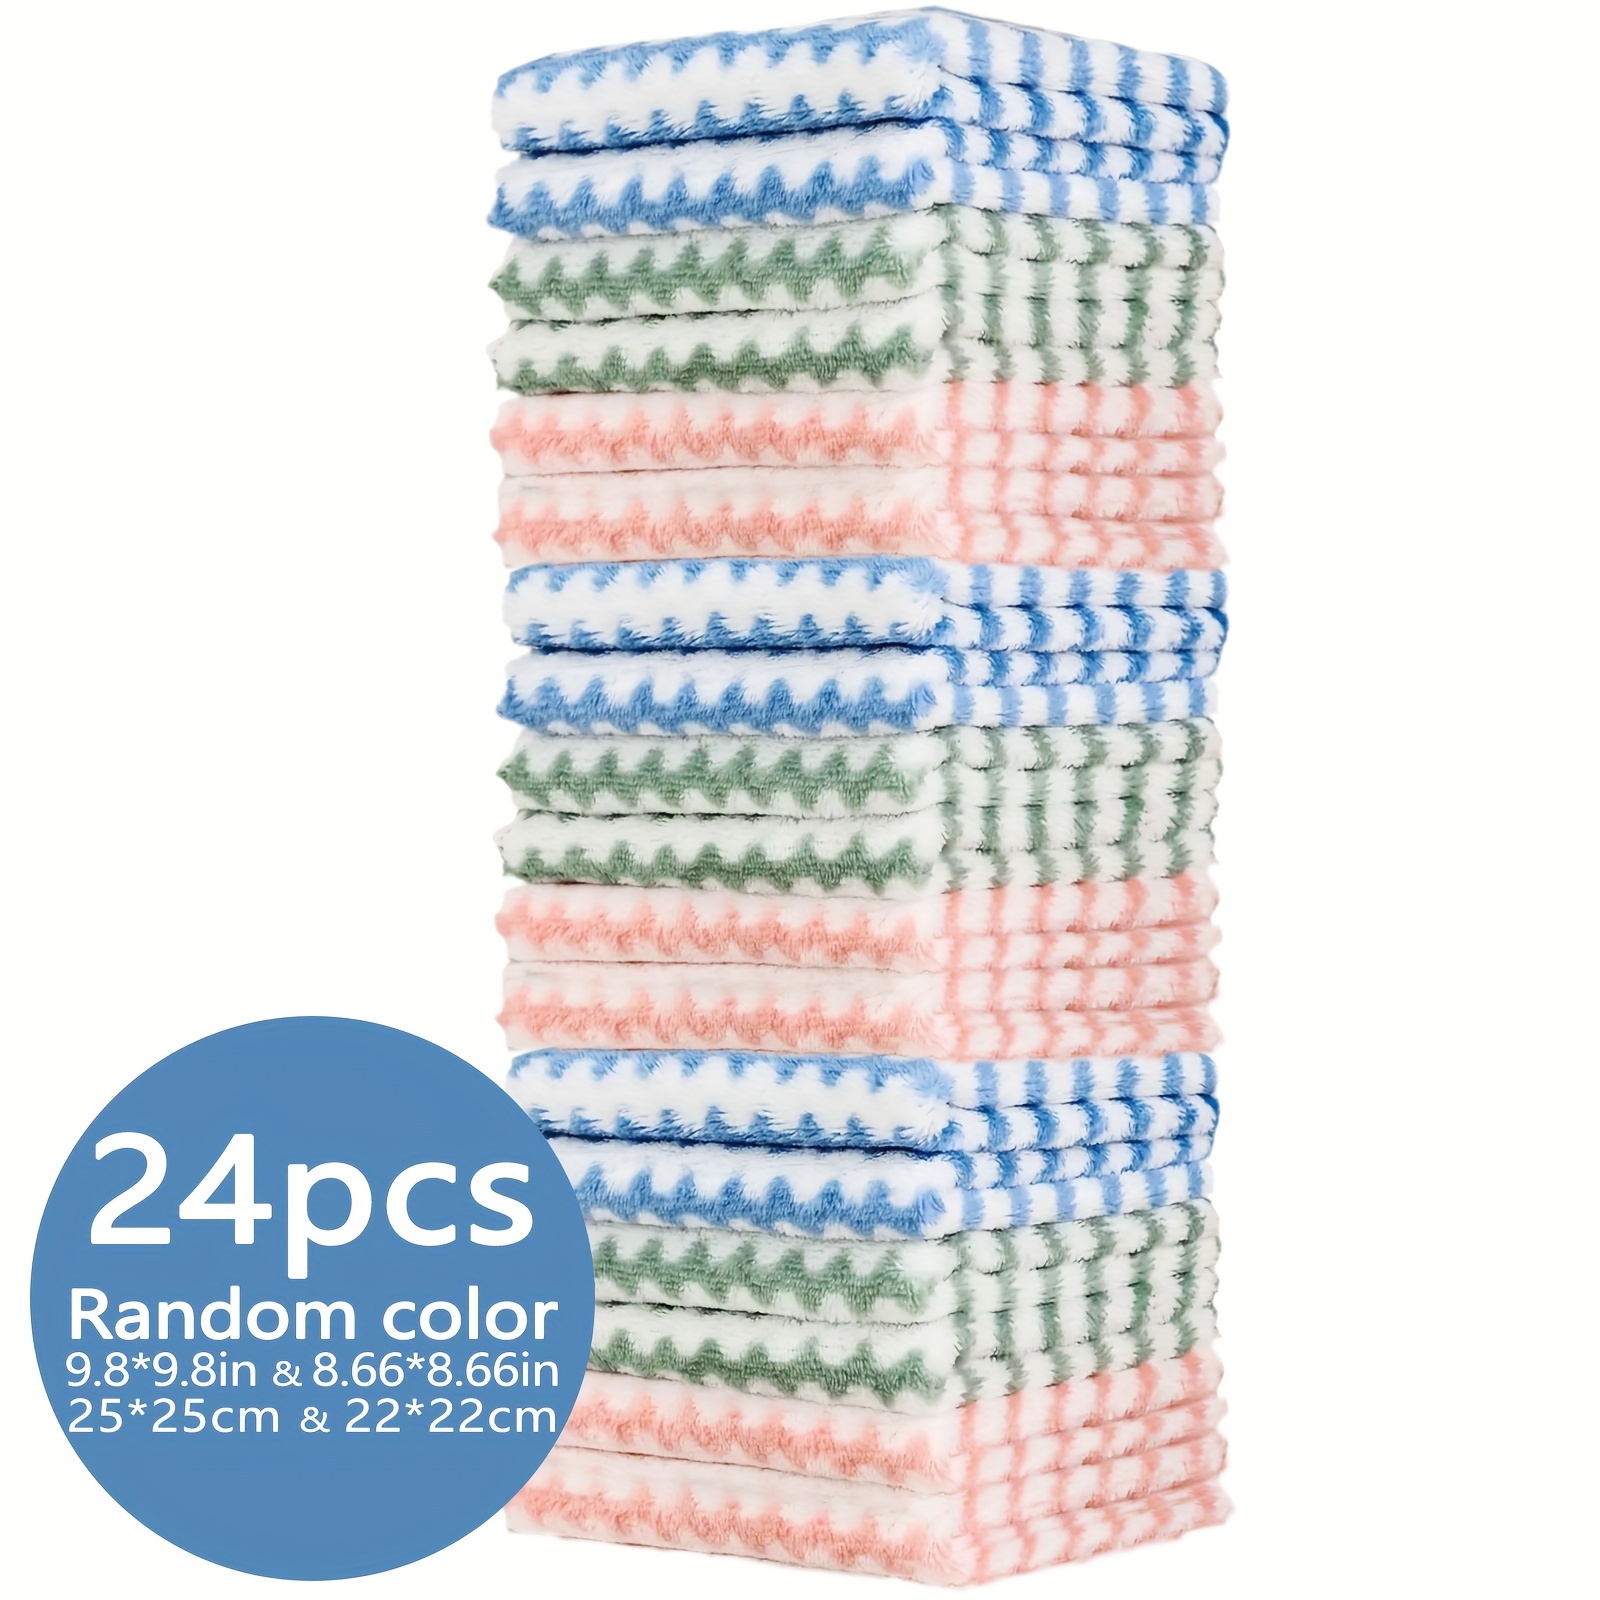 

Ultra-absorbent Coral Fleece Cleaning Cloths - 24/12/6 Piece, Reusable & Machine Washable, Assorted Sizes (9.8"x9.8", 8.66"x8.66"), Ideal For Kitchen, Floors, Furniture & Outdoor Use